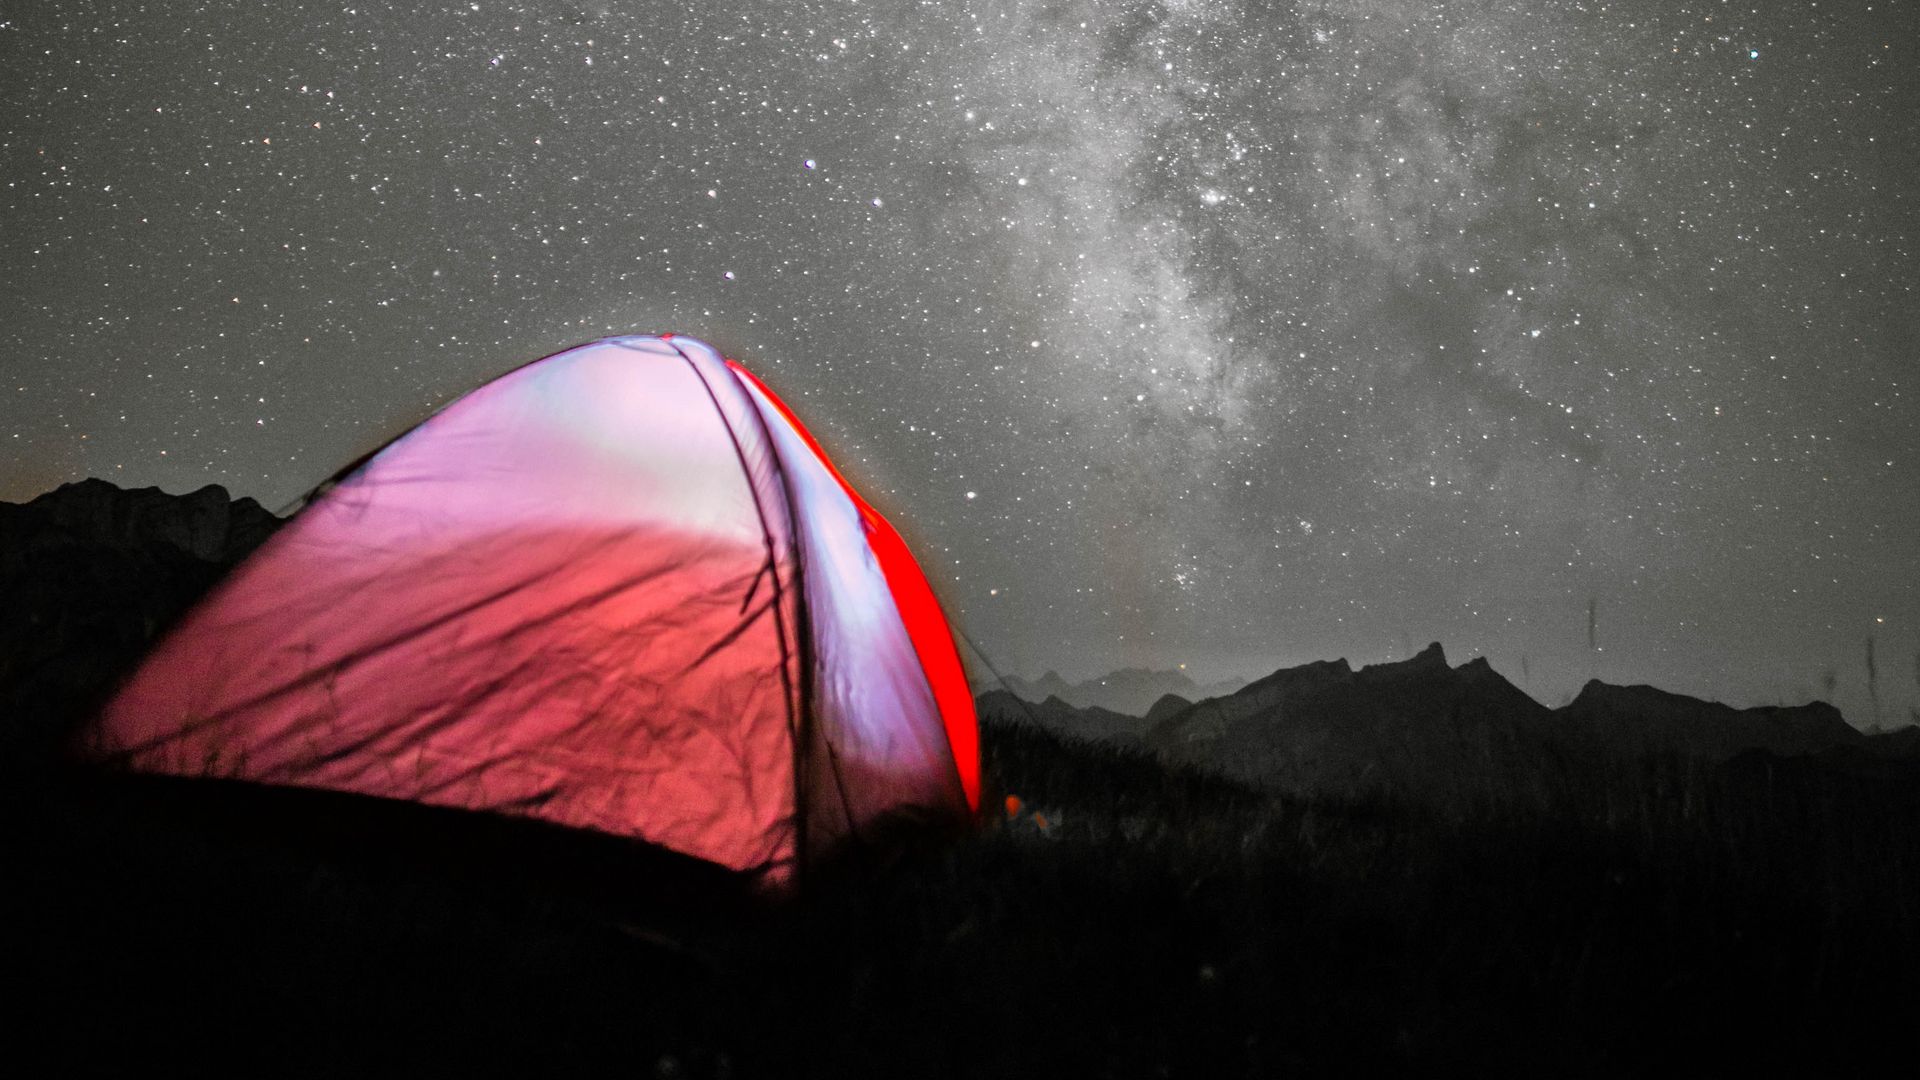 Download wallpaper x tent camping night stars starry sky full hd hdtv fhd p hd background